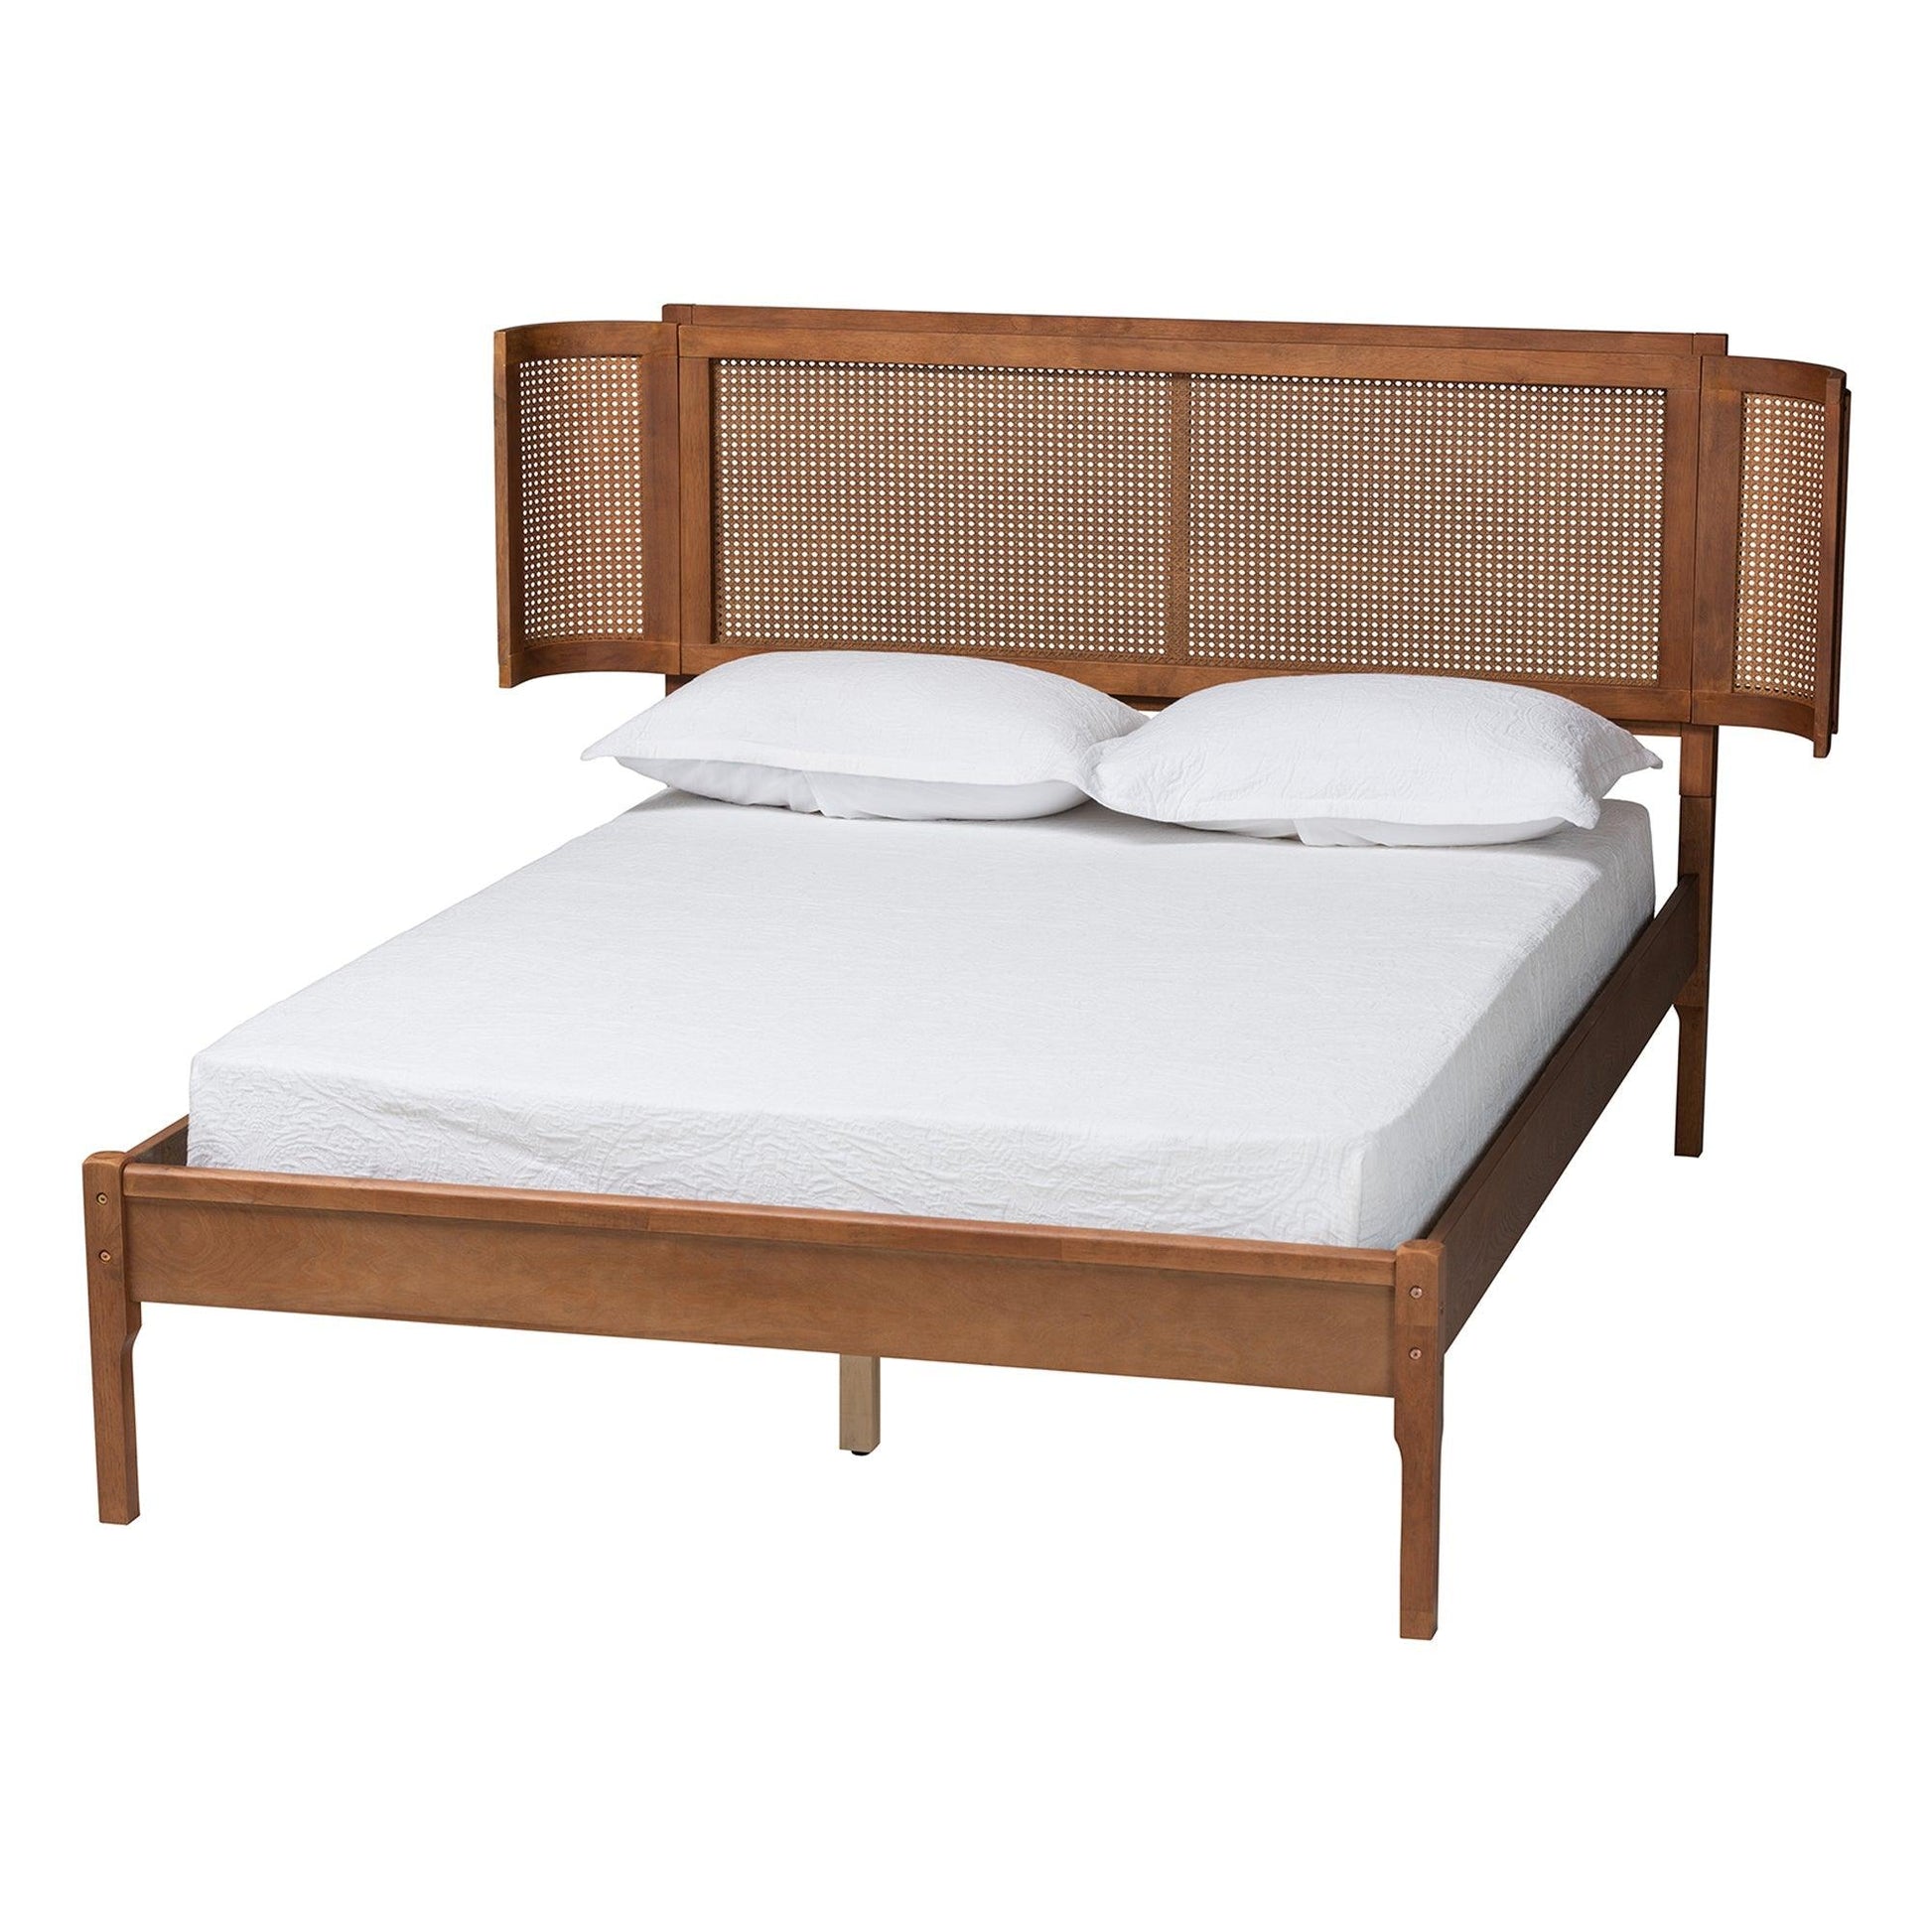 Eridian Mid-Century Modern Walnut Brown Finished Wood and Natural Rattan Queen Size Platform Bed FredCo